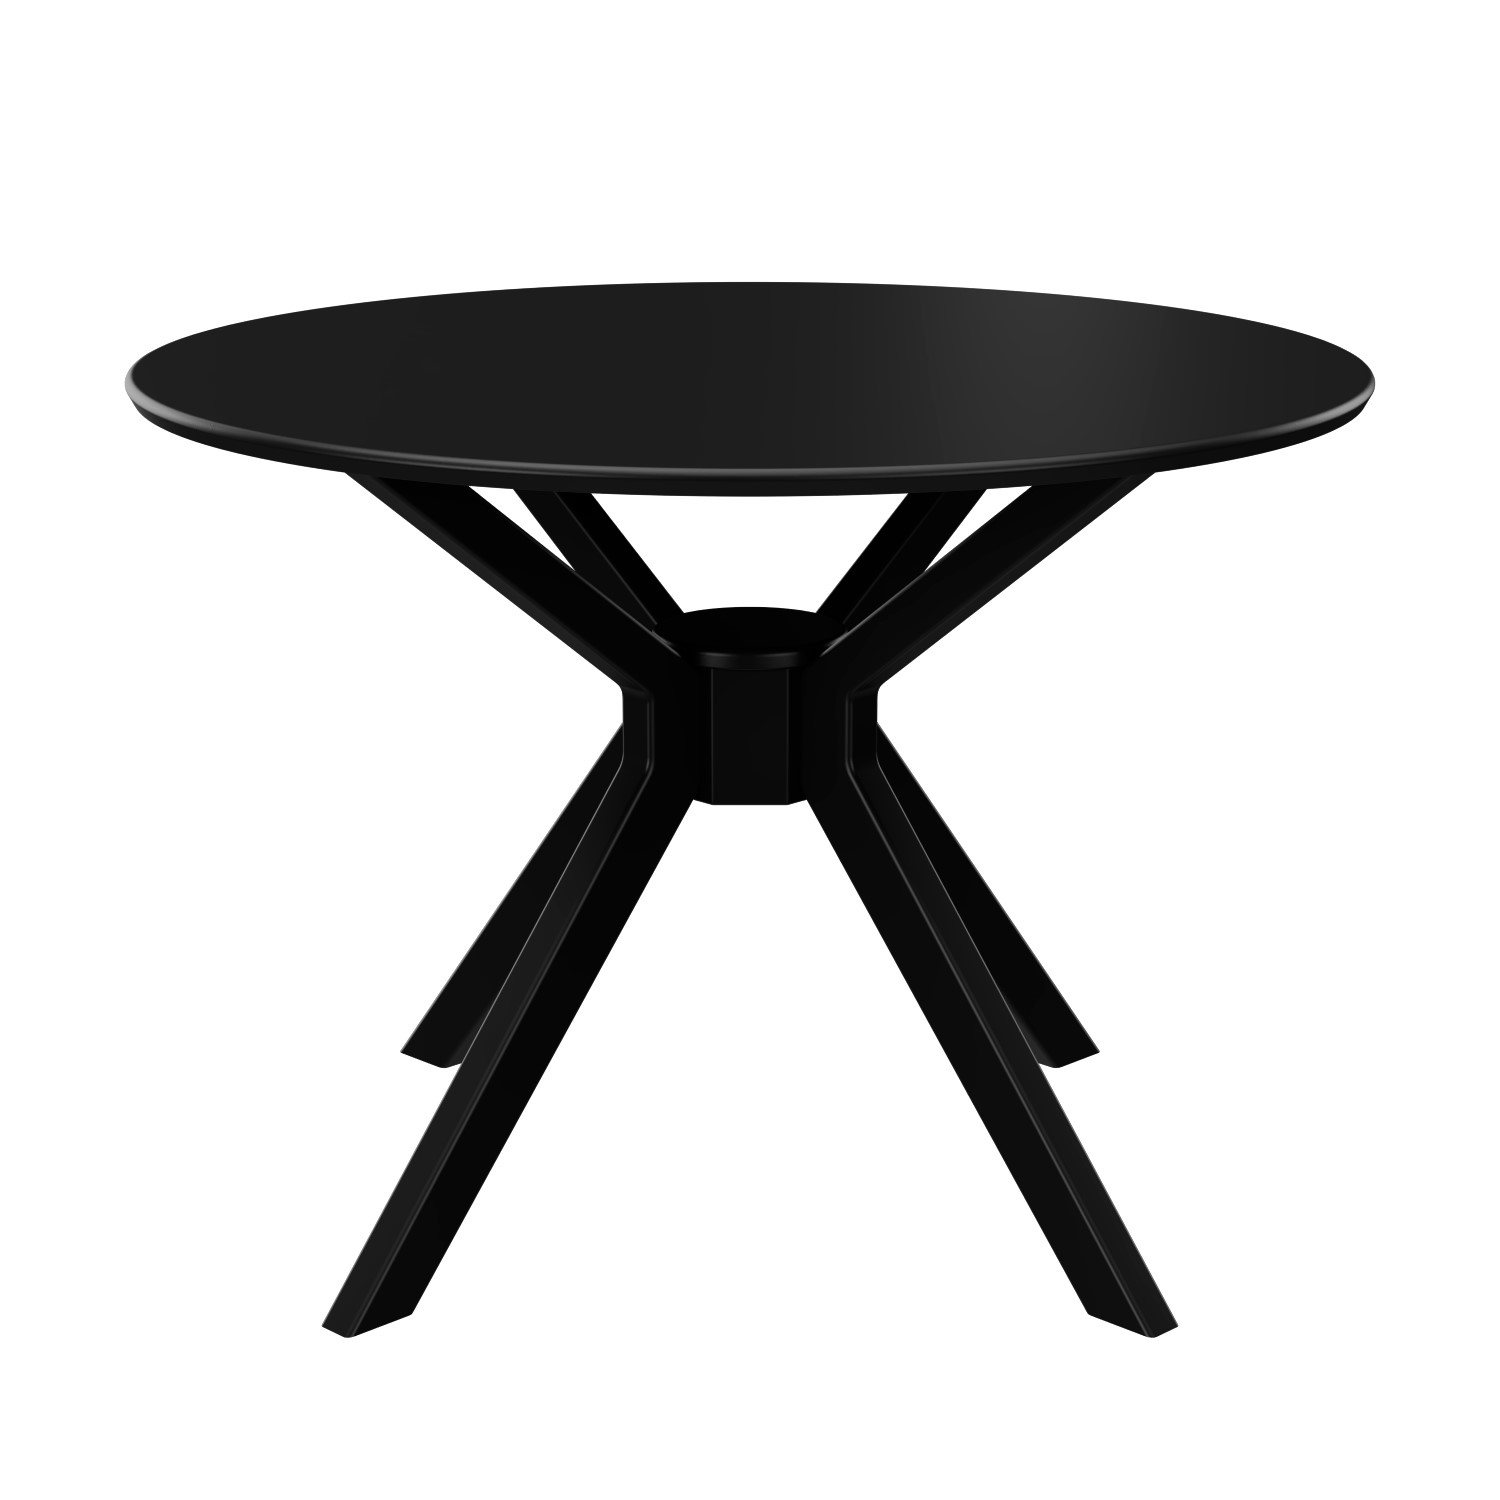 Black Round Dining Table With 4 Mustard, Black Round Dining Table And 4 Chairs